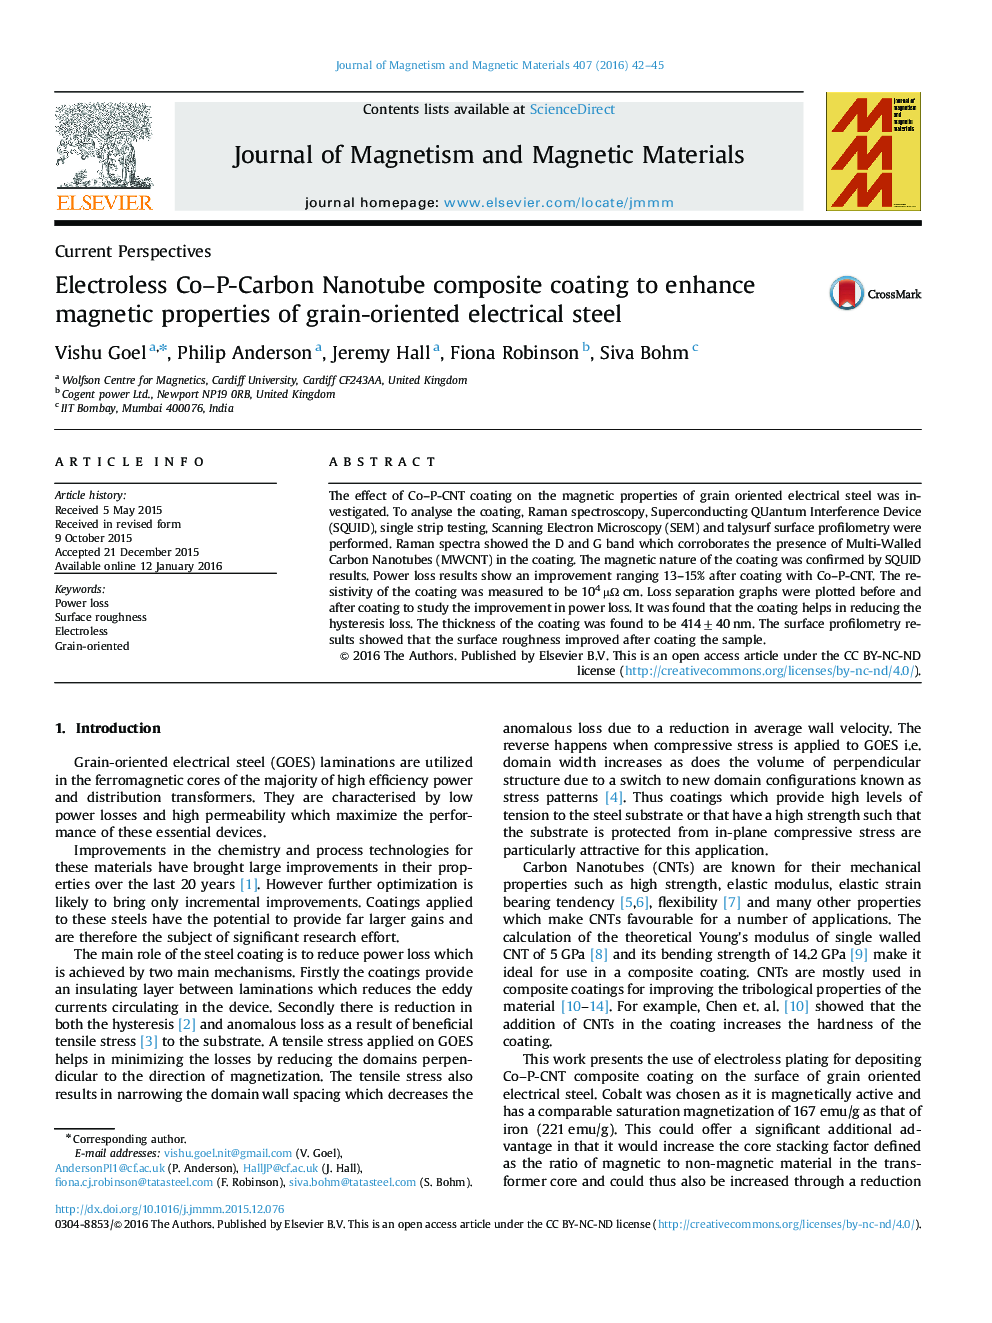 Electroless Co-P-Carbon Nanotube composite coating to enhance magnetic properties of grain-oriented electrical steel